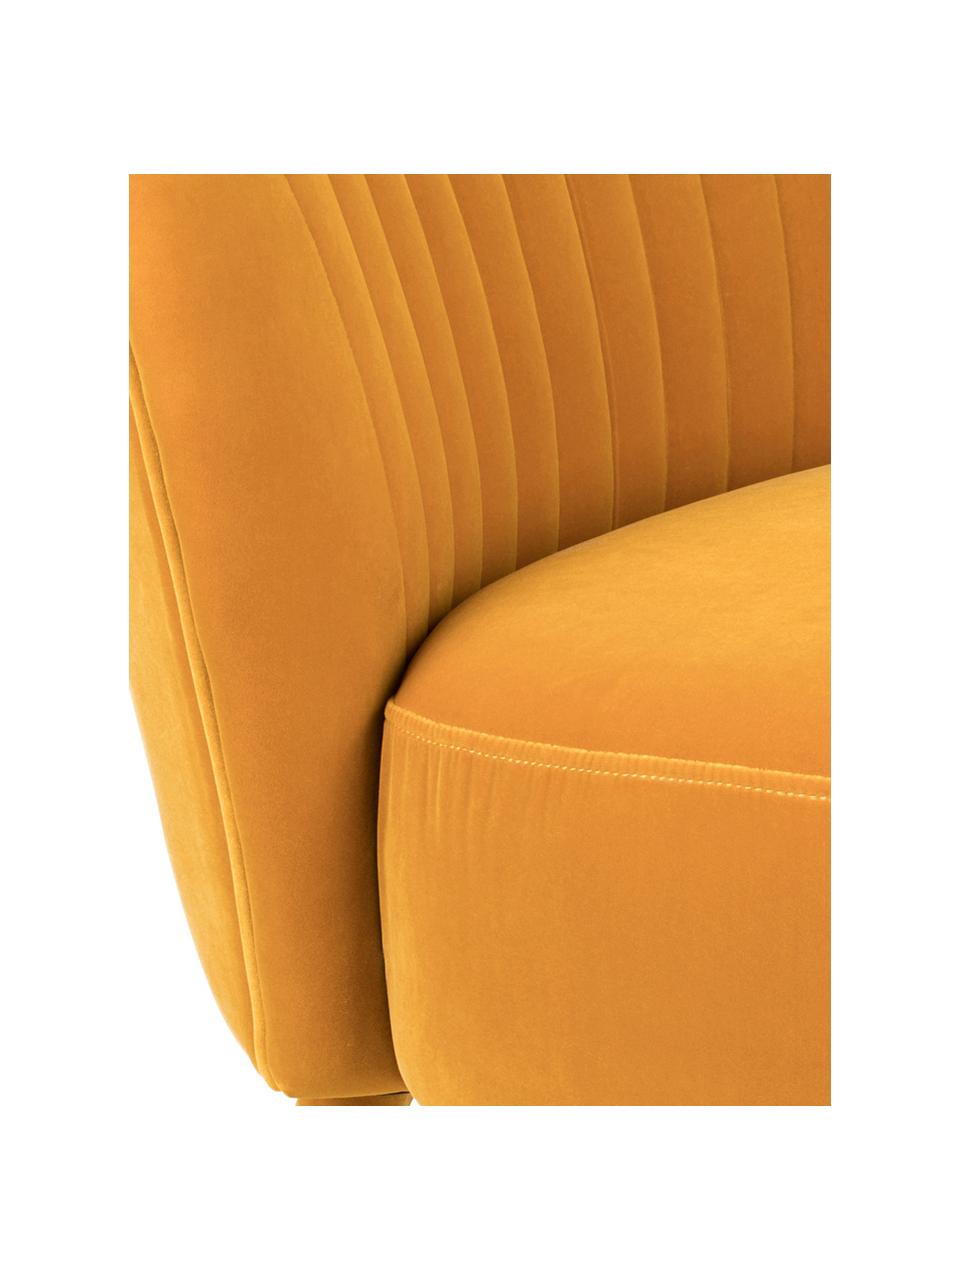 Fauteuil cocktail en velours jaune Well Dressed, Velours ocre